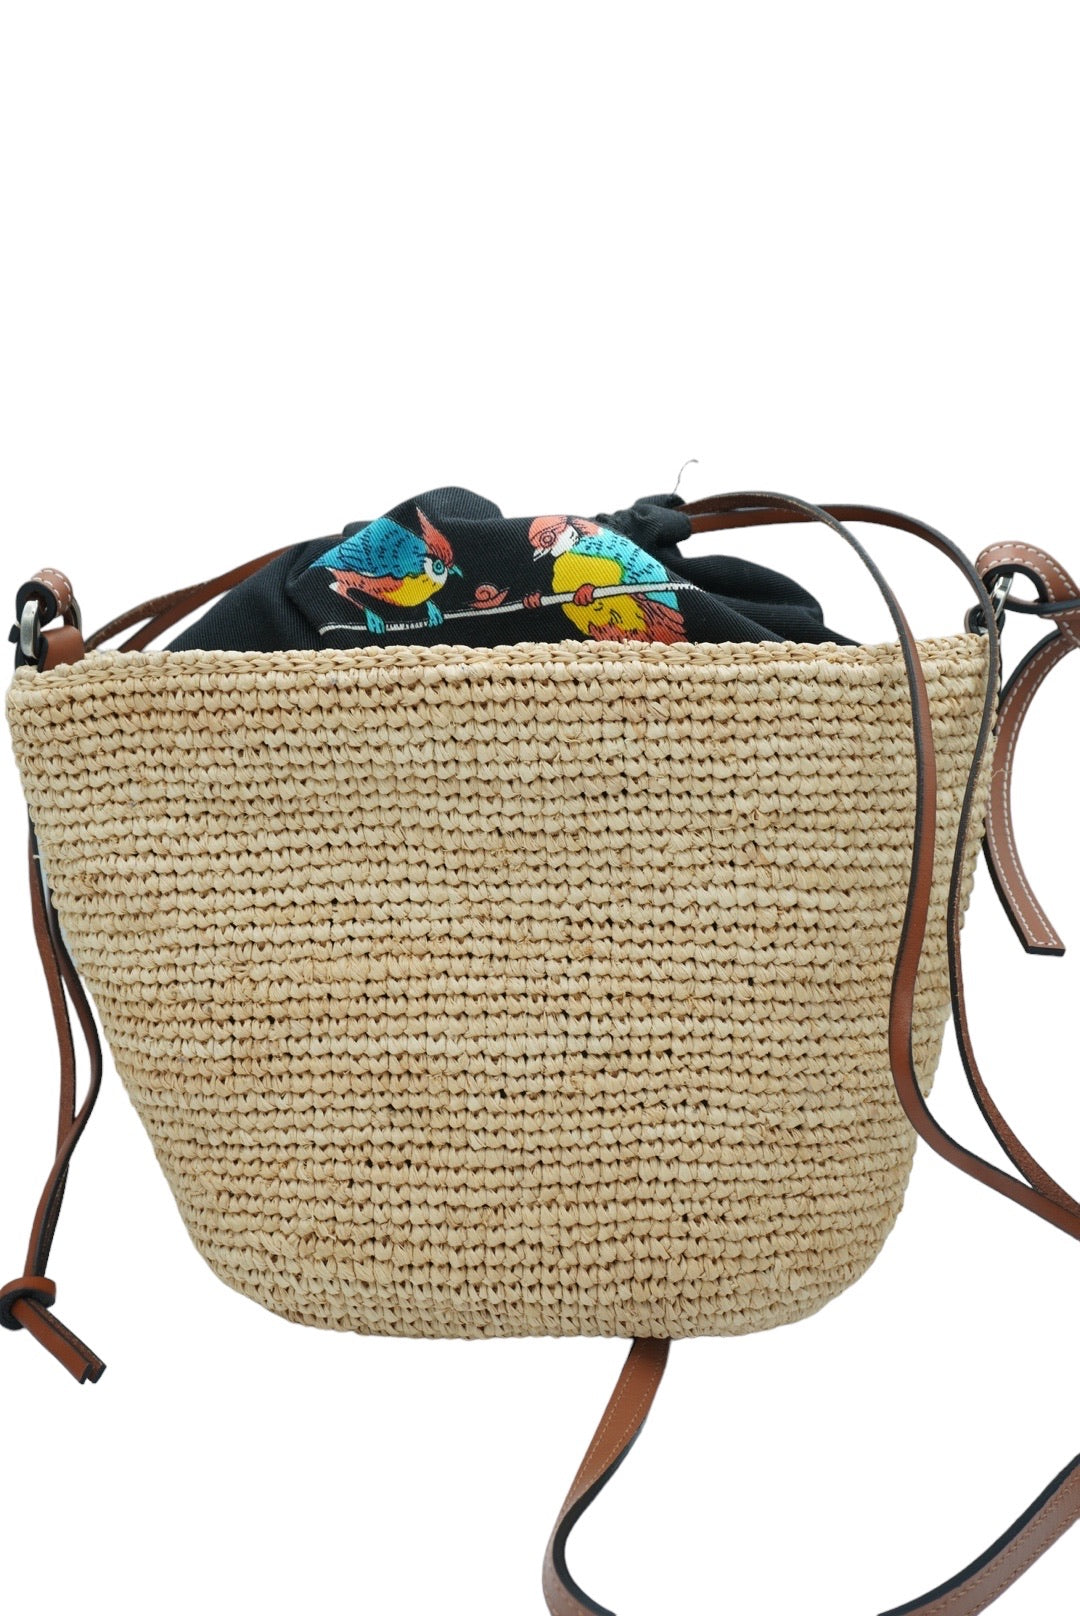 LOEWE - Ibiza Pochette Crossbody Bag Woven Raffia and Leather with Printed Canvas